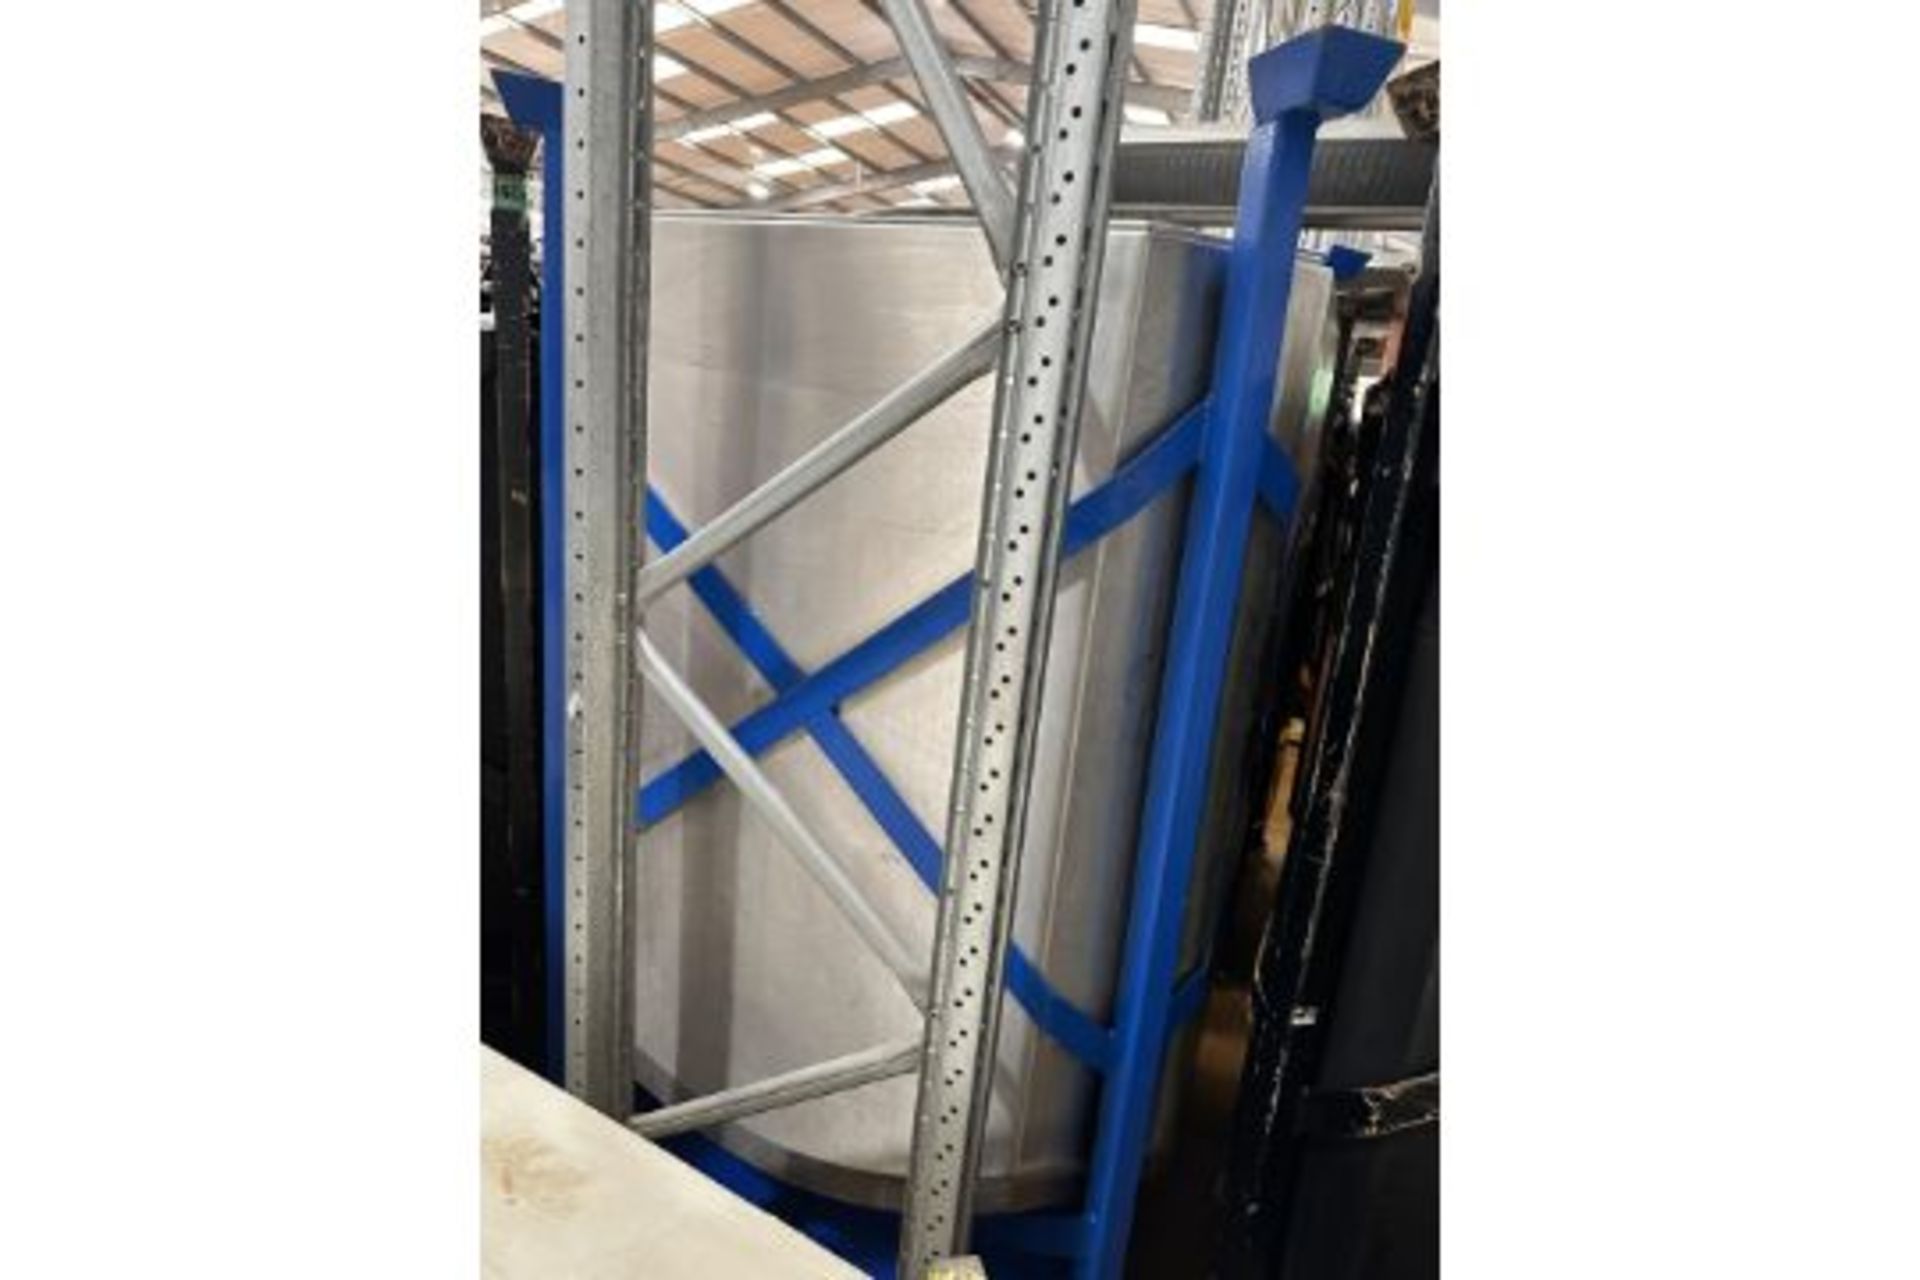 5 X FORKLIFTABLE FRAMES EACH HOLDING A S/S BIN. - Image 3 of 5